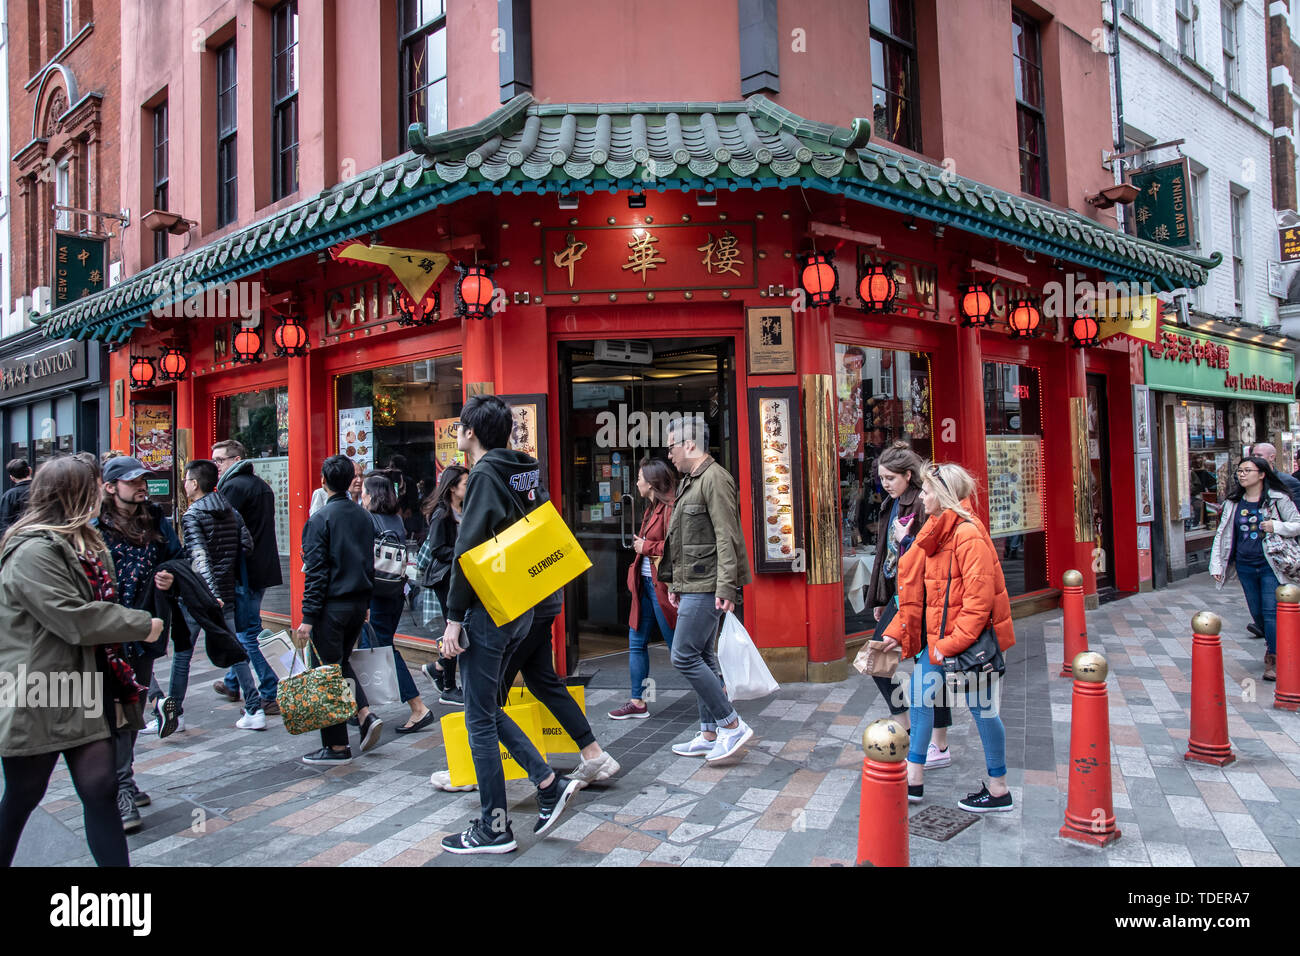 London, UK. London, UK. New China in London Chinatown Sweet Tooth Cafe and Restaurant at Newport Court and Garret Street on 15 June 2019, UK. Credit: Picture Capital/Alamy Live News Credit: Picture Capital/Alamy Live News Stock Photo